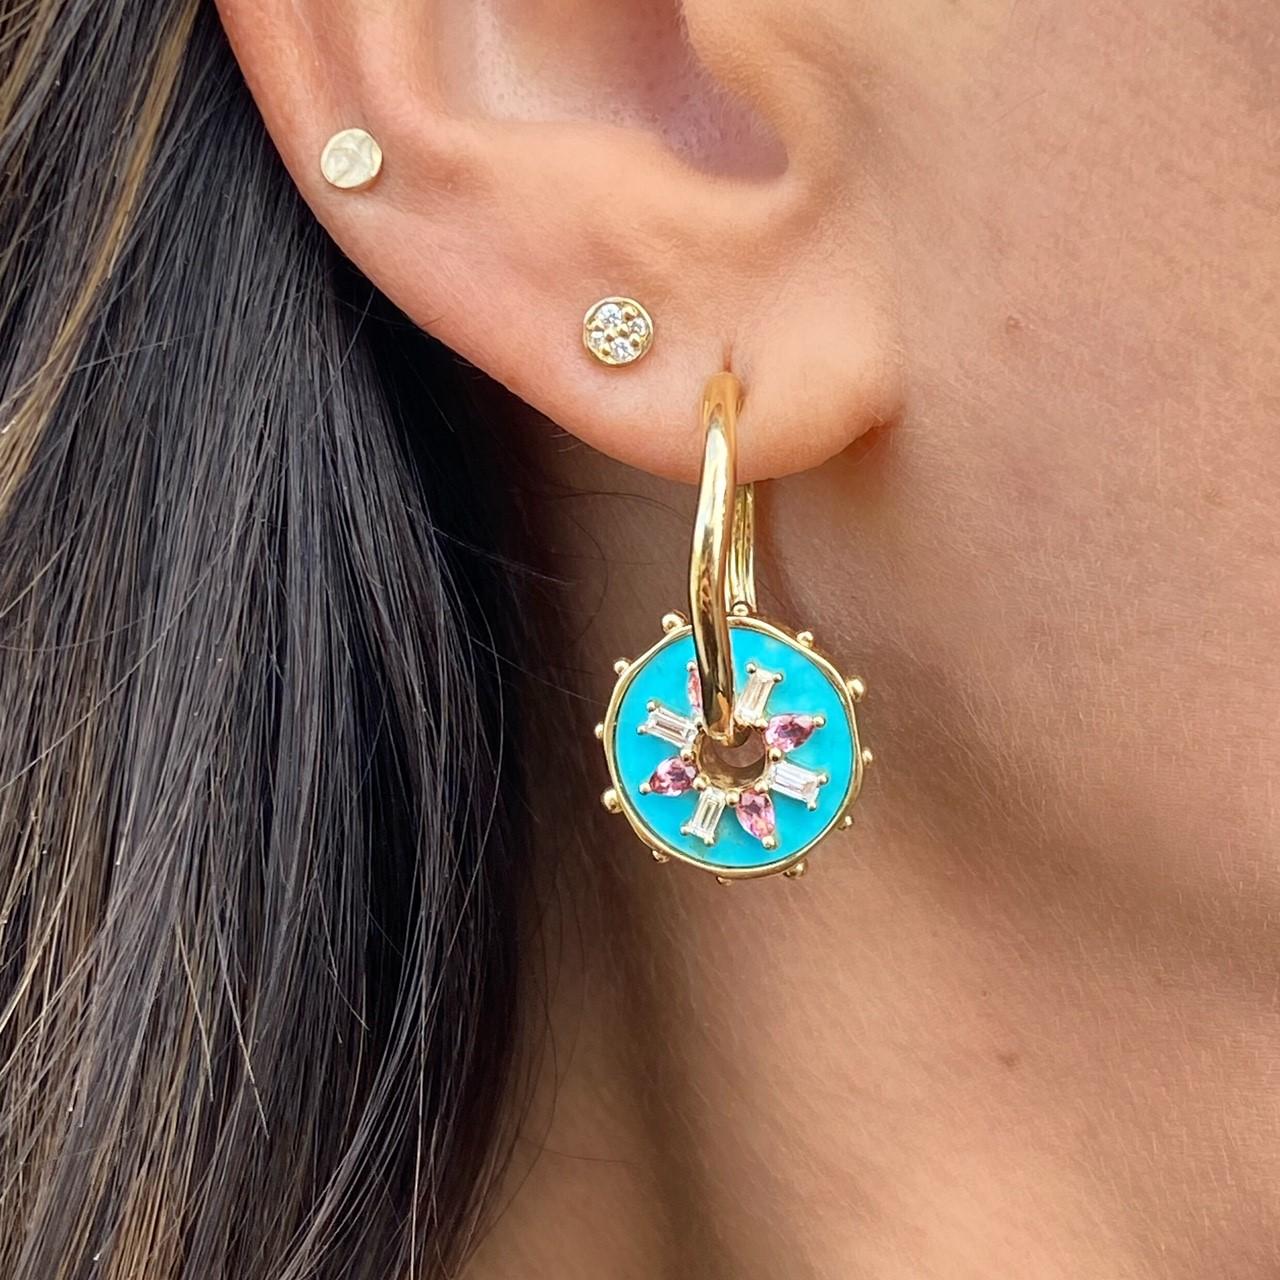 Your love is colorful just like the Open Love Explosion Tablet Discs. A turquoise tablet, vibrant pink tourmaline and baguette diamonds make this stunning disc perfect to add to a Three Stories Hoop Earring or worn on a chain as a pendant necklace.